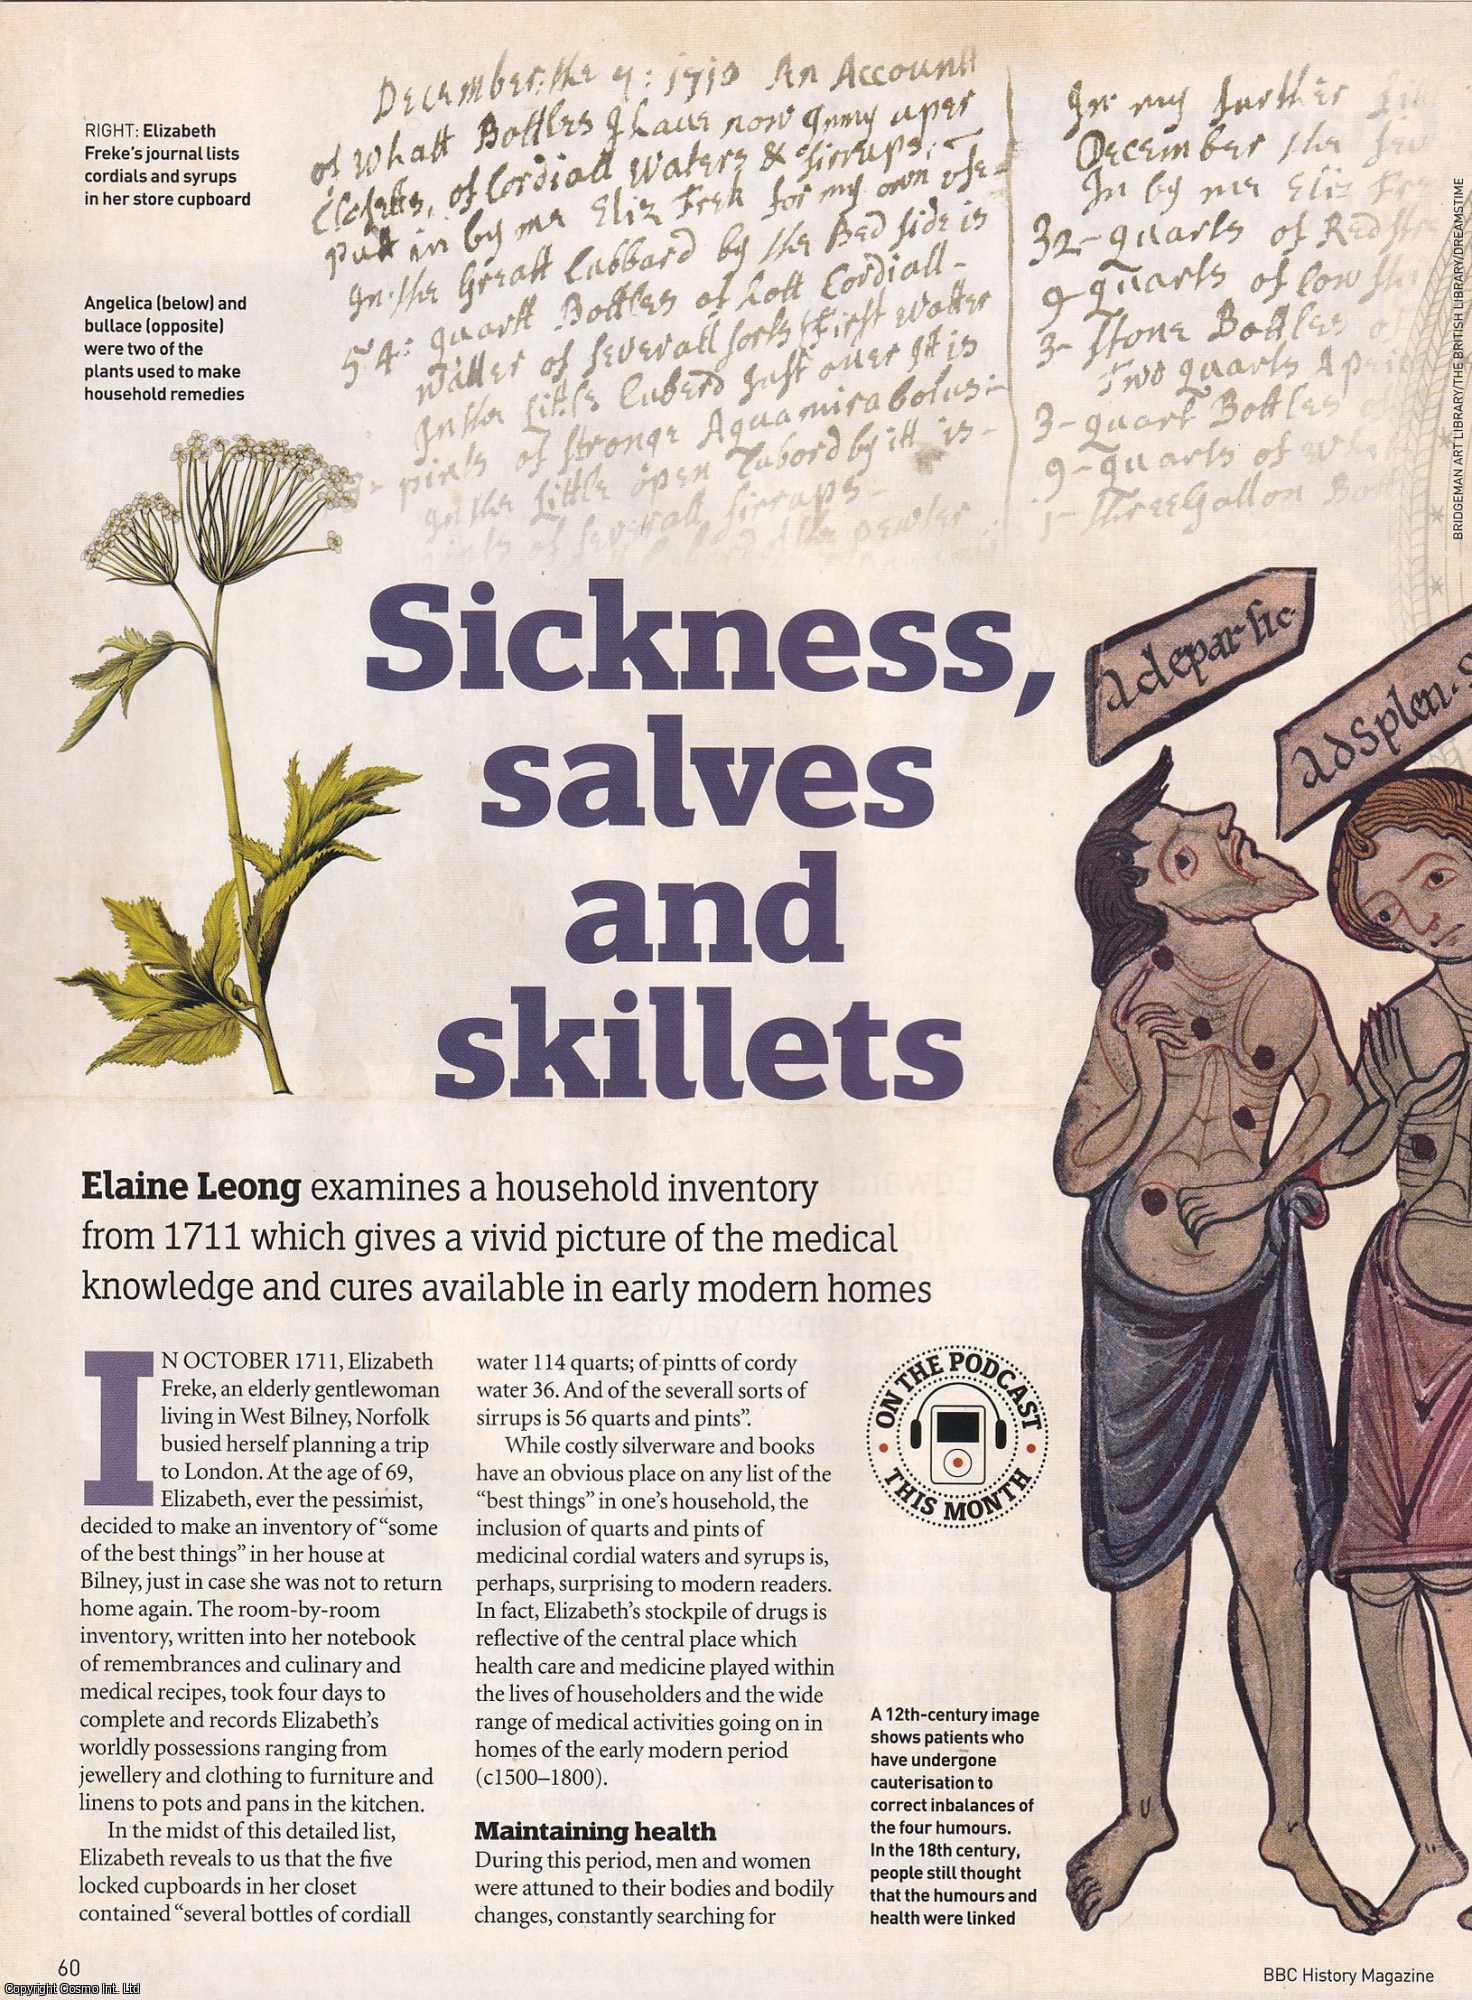 Elaine Leong - Sickness, Salves and Skillets: Examining the 'Medicines' in a Household Inventory of 1711. An original article from BBC History Magazine, 2010.